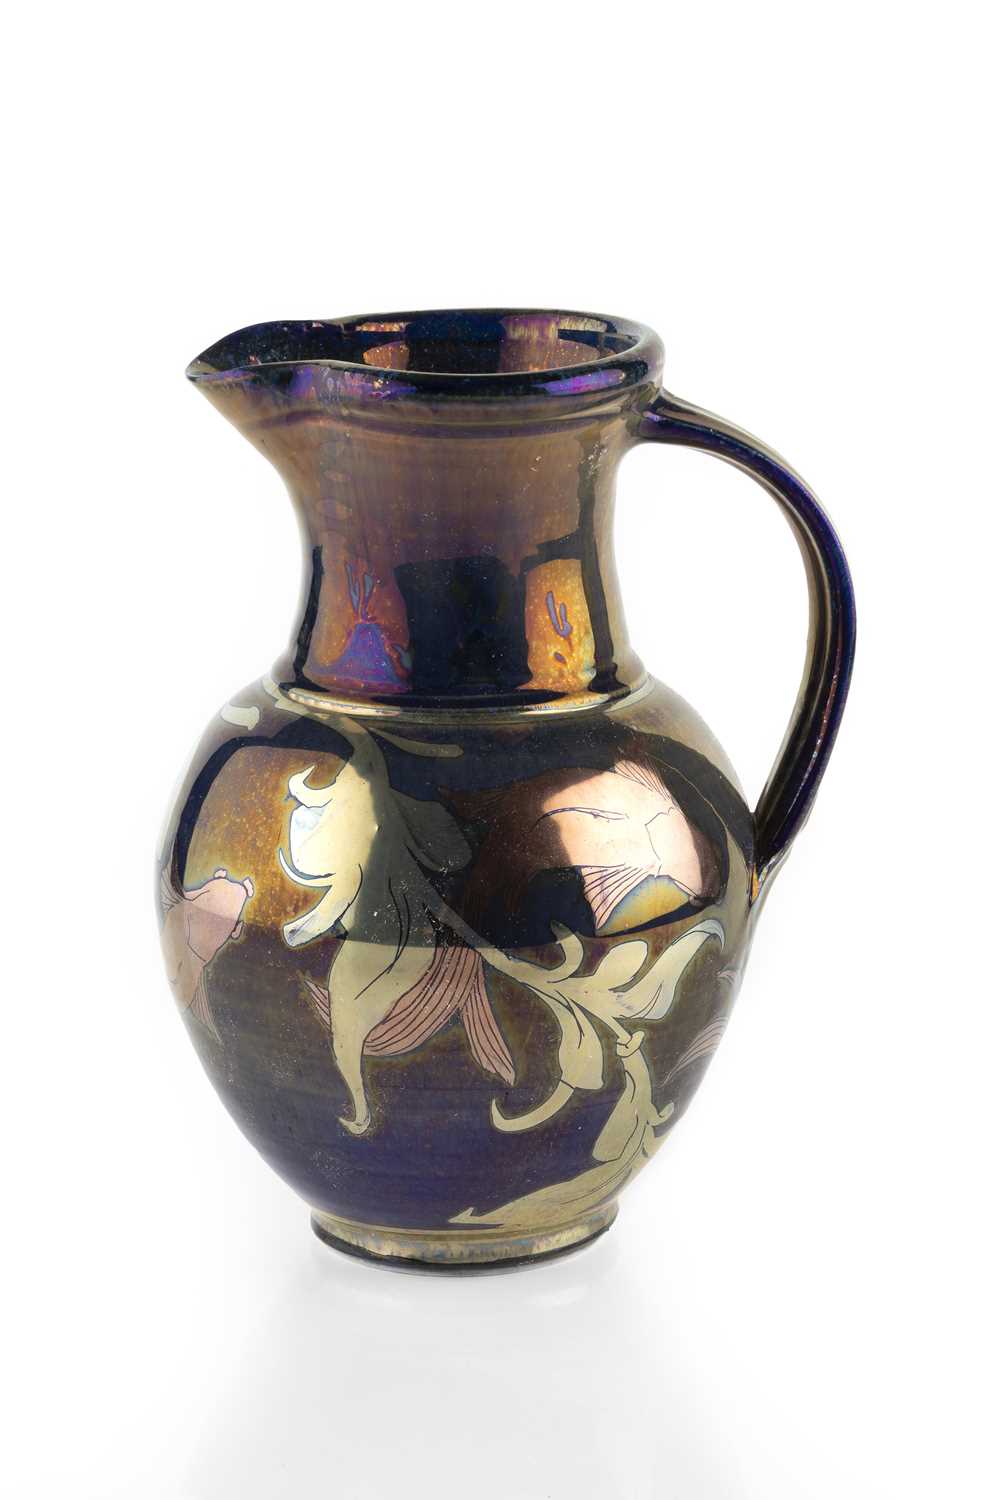 Jonathan Chiswell Jones (b.1944) Jug reduction fired lustre in gold with blue divisions, with fish